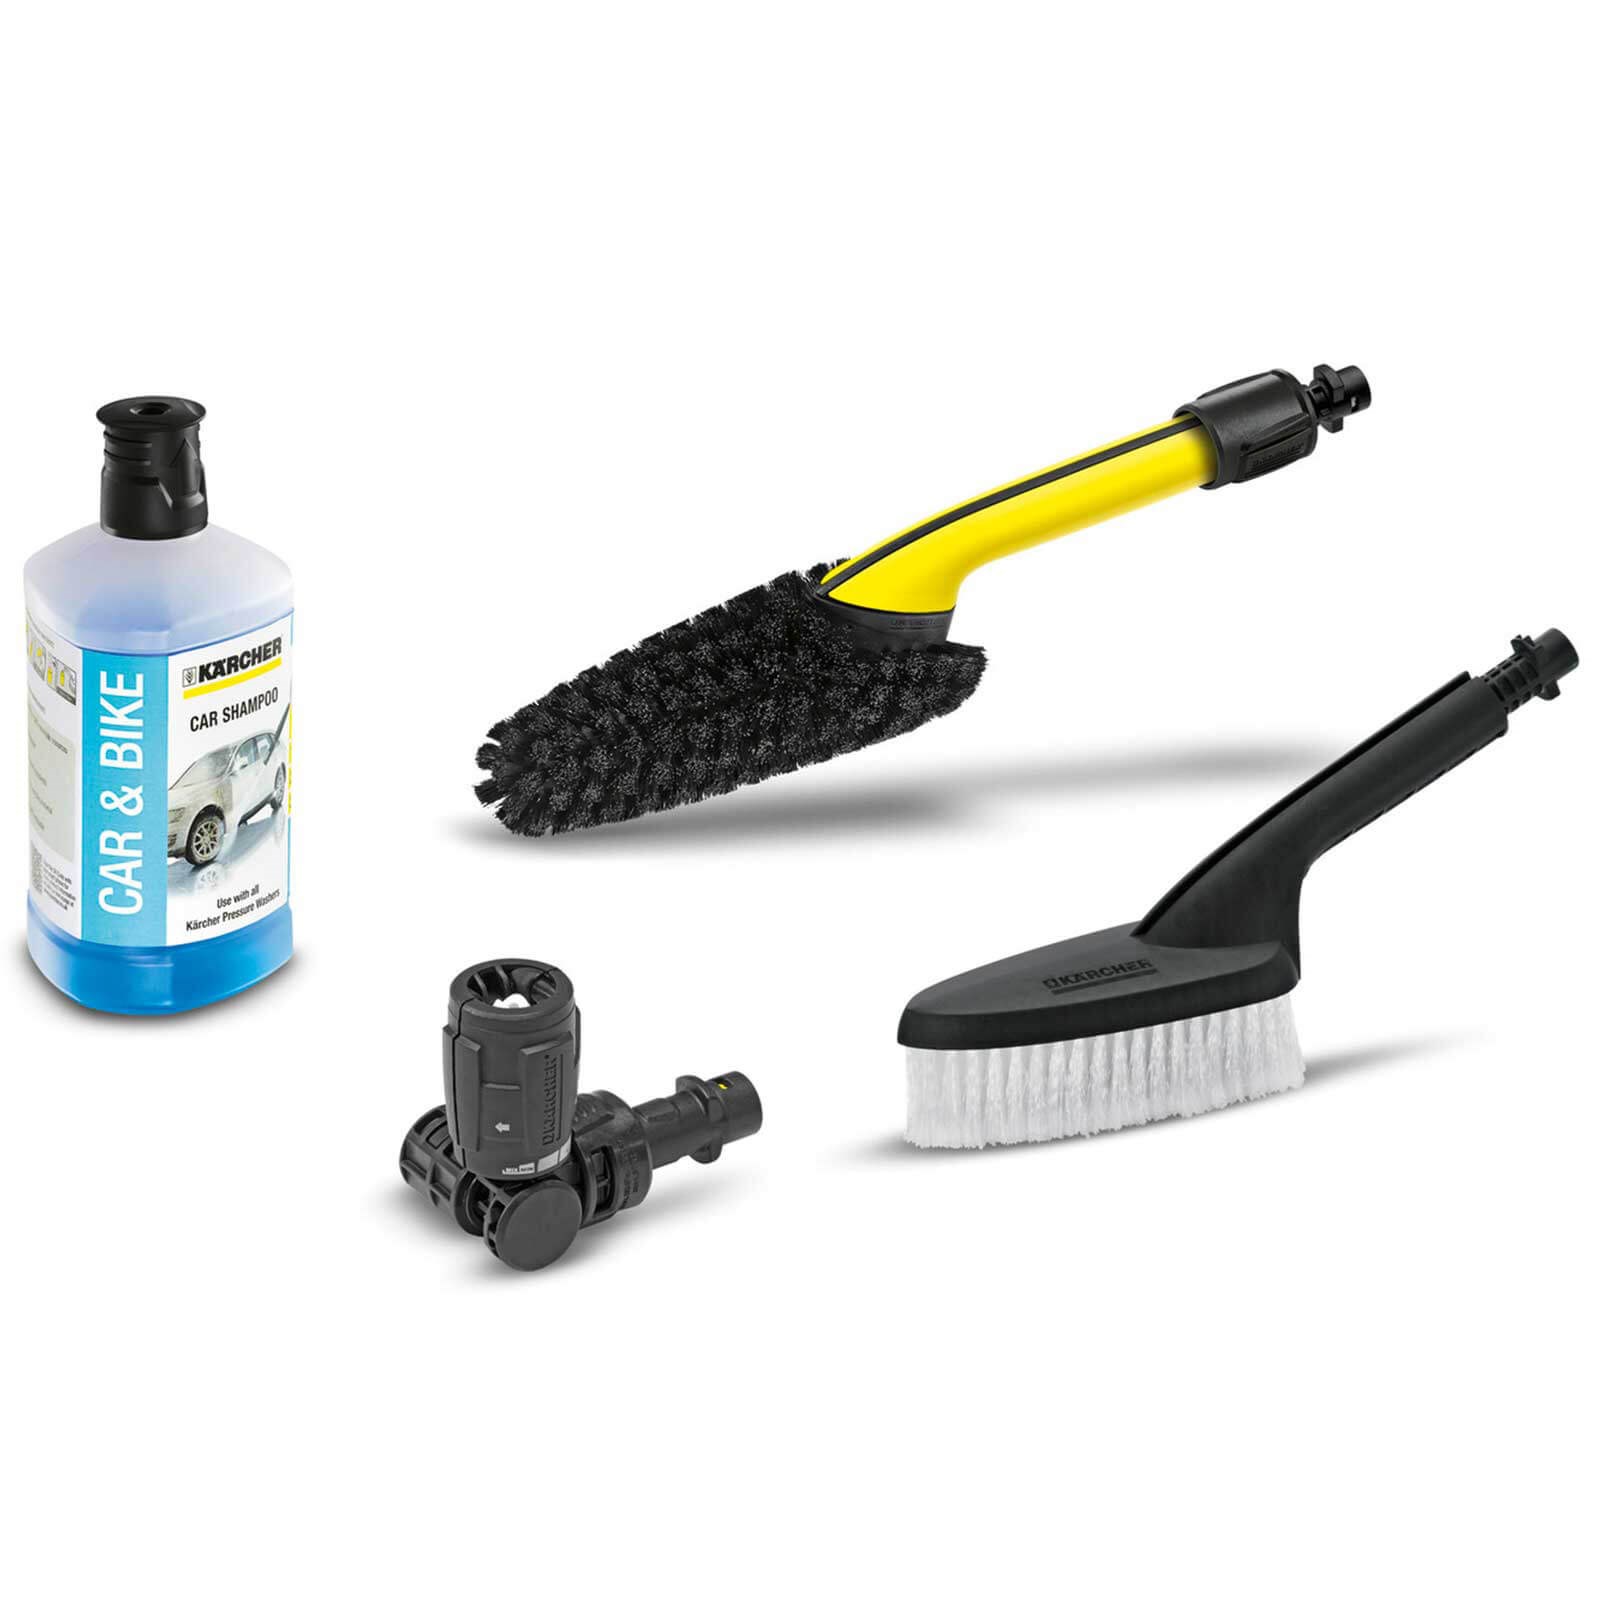 Motorcycle Cleaning Kit